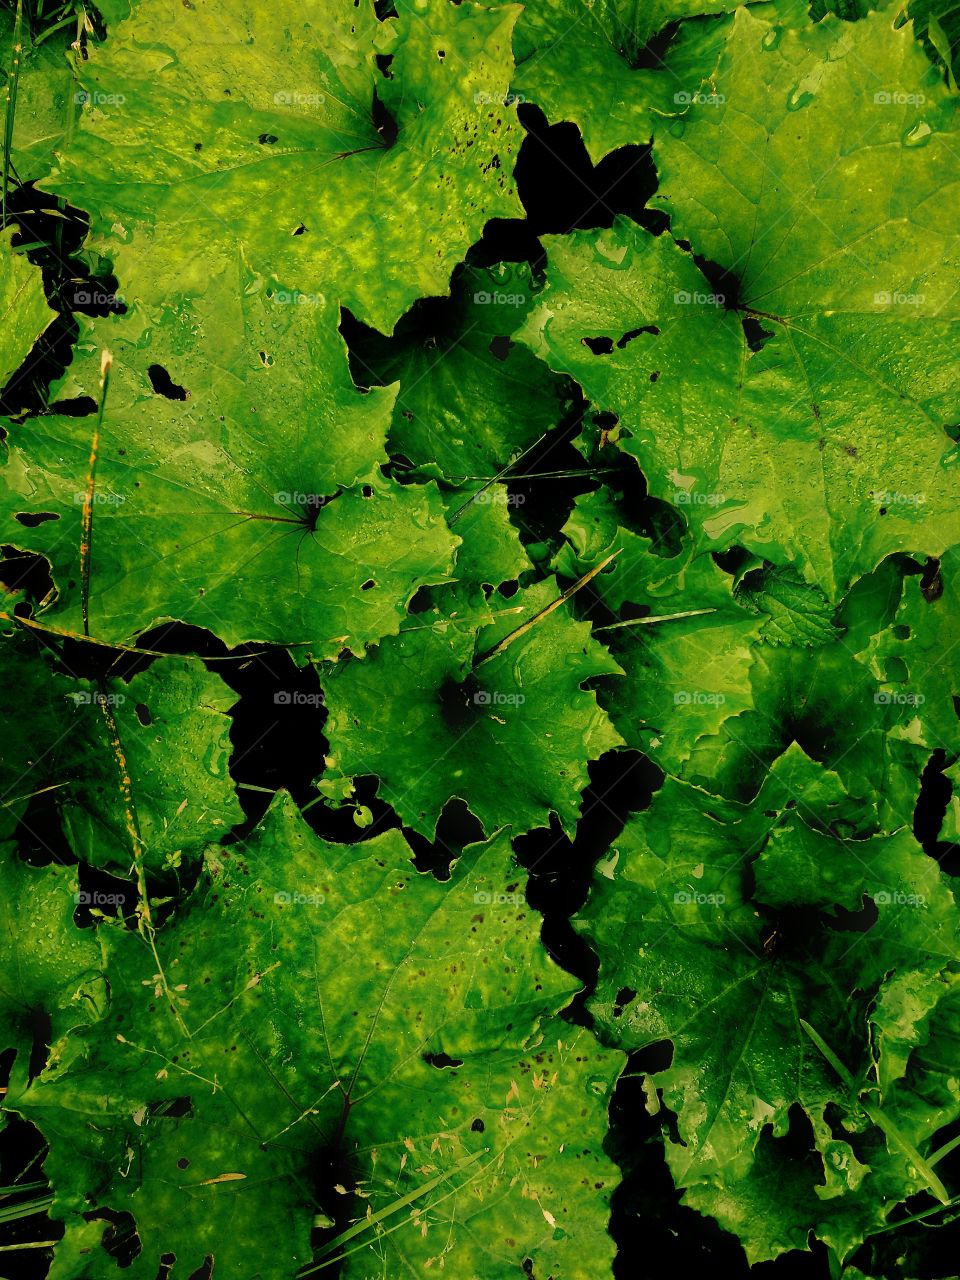 Green leaves texture 